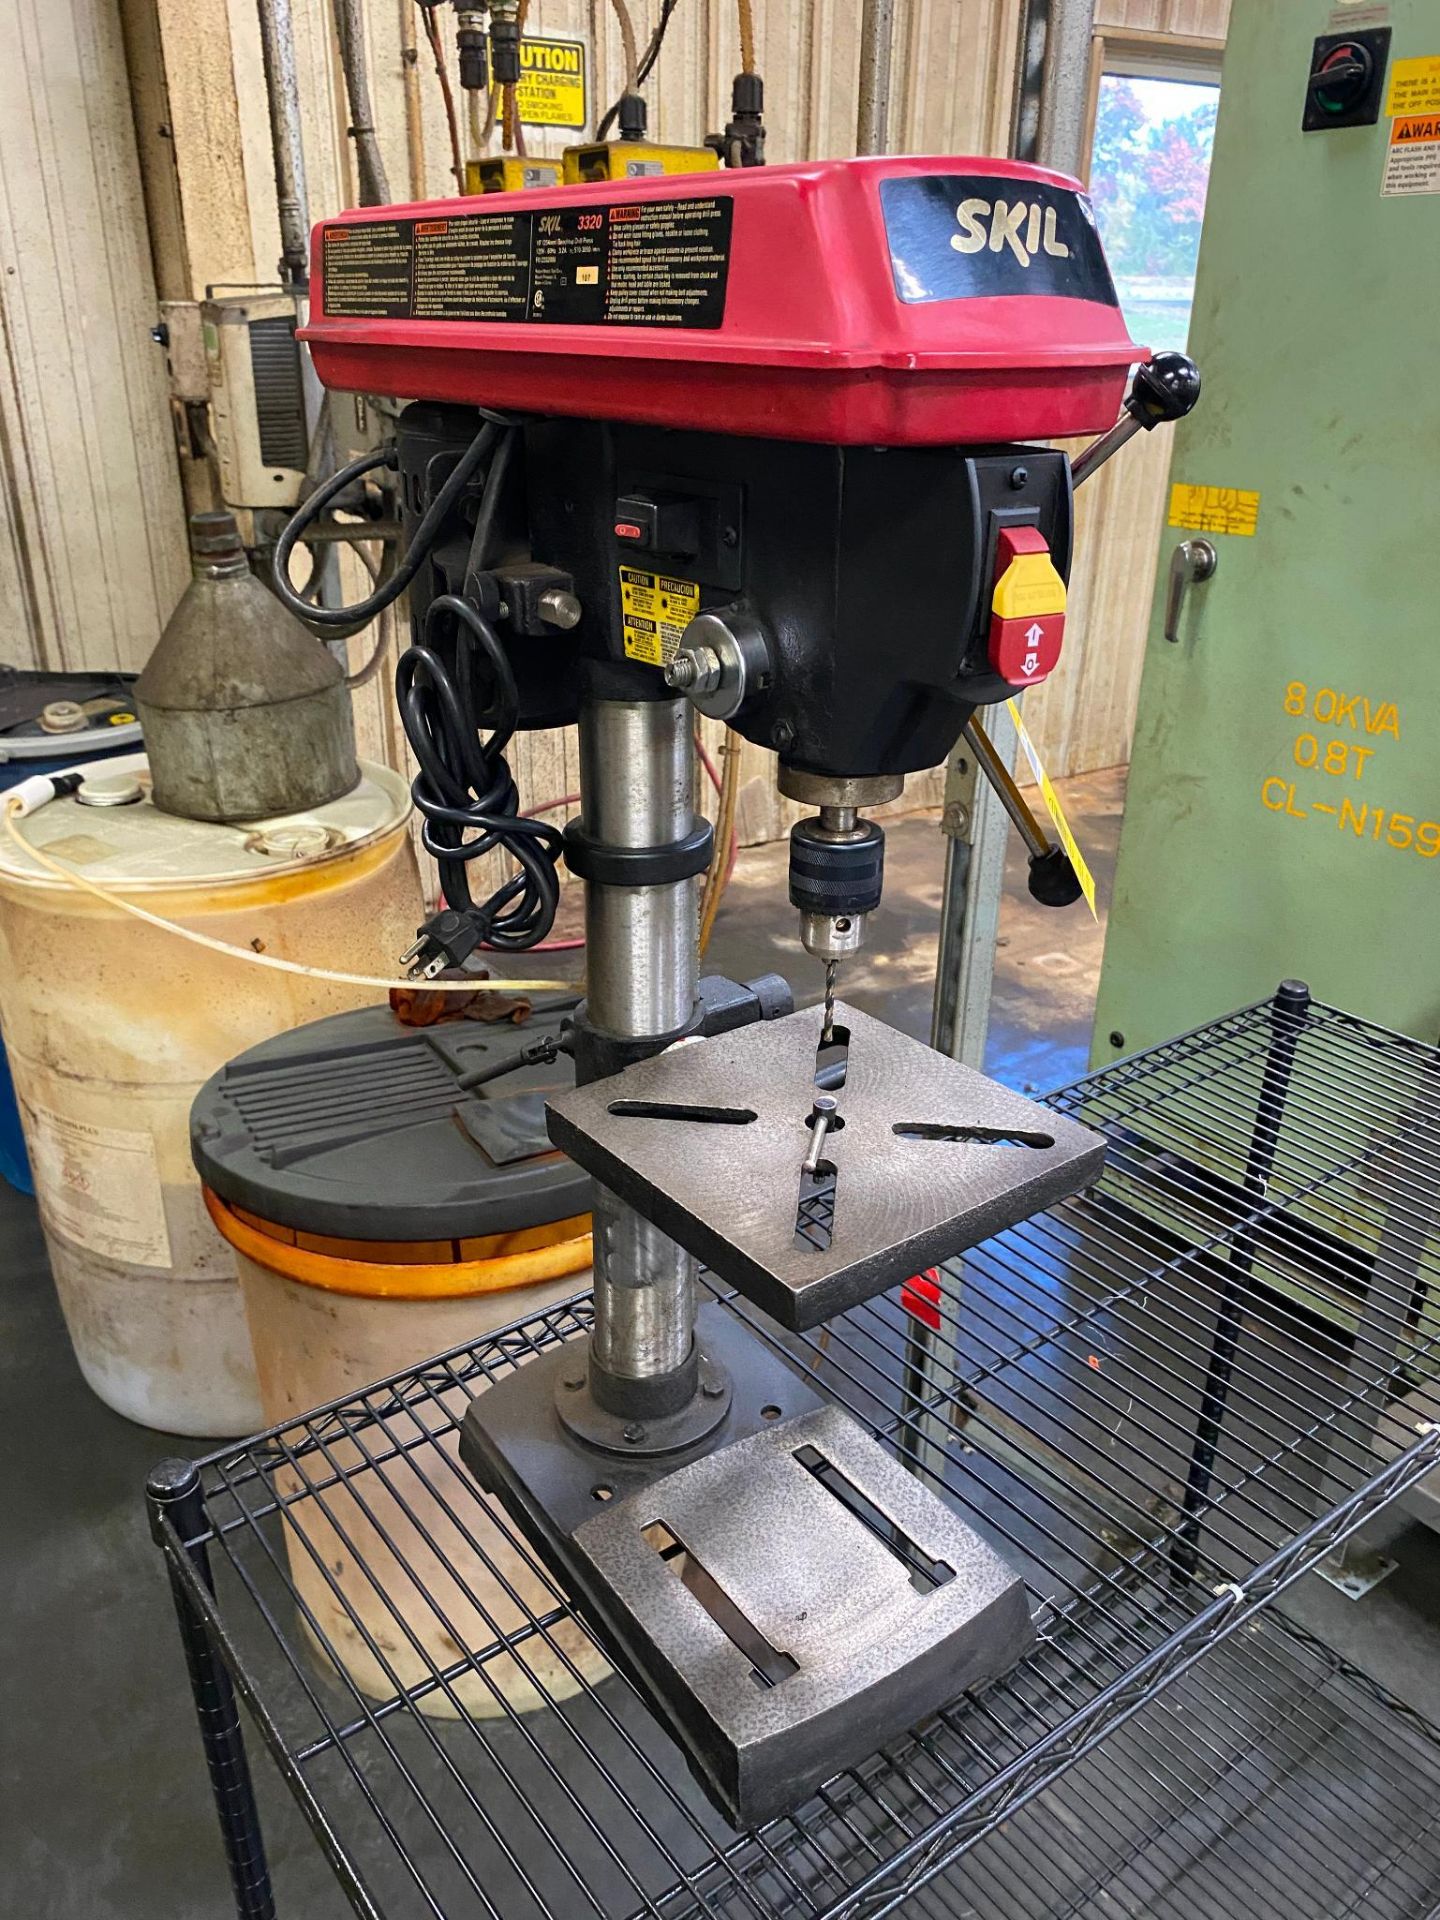 DRILL PRESS, SKIL, TABLE TOP, w/ rack - Image 2 of 2